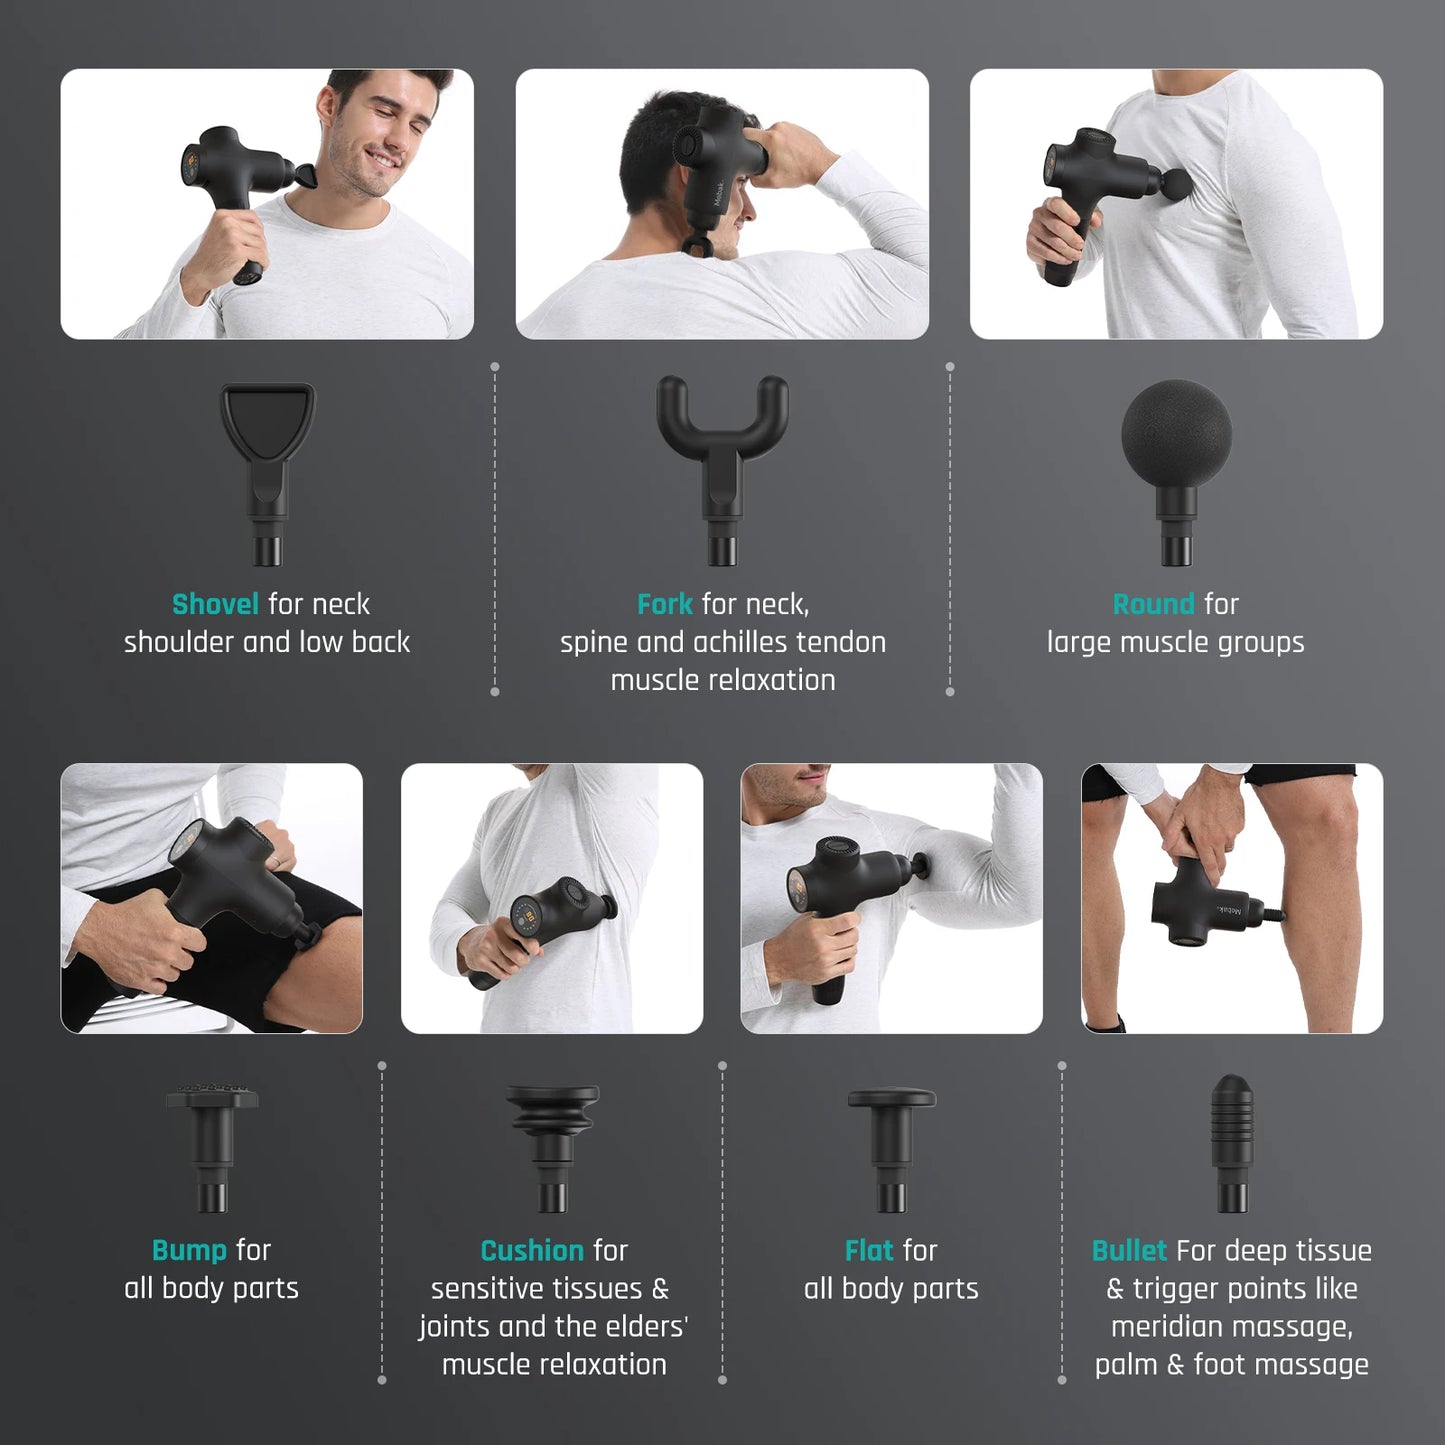 Mebak 3 Massage Gun For Muscle Pain Relief, Relaxation, Recovery